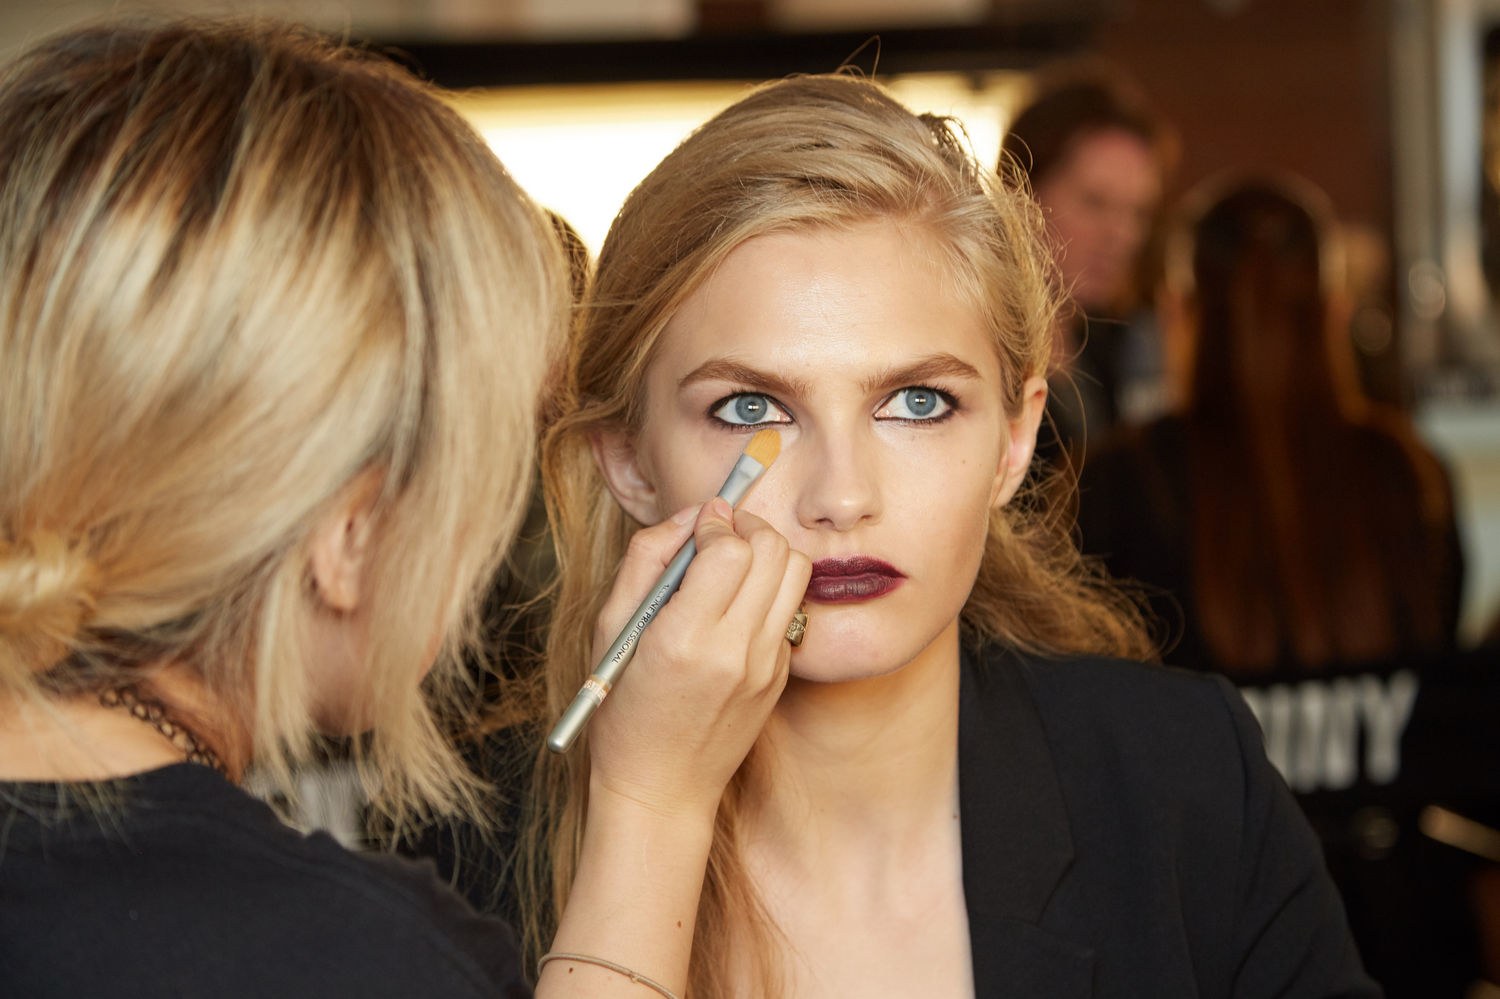 Brush To Stardom A Step By Step Guide On How To Become A Celebrity Makeup Artist